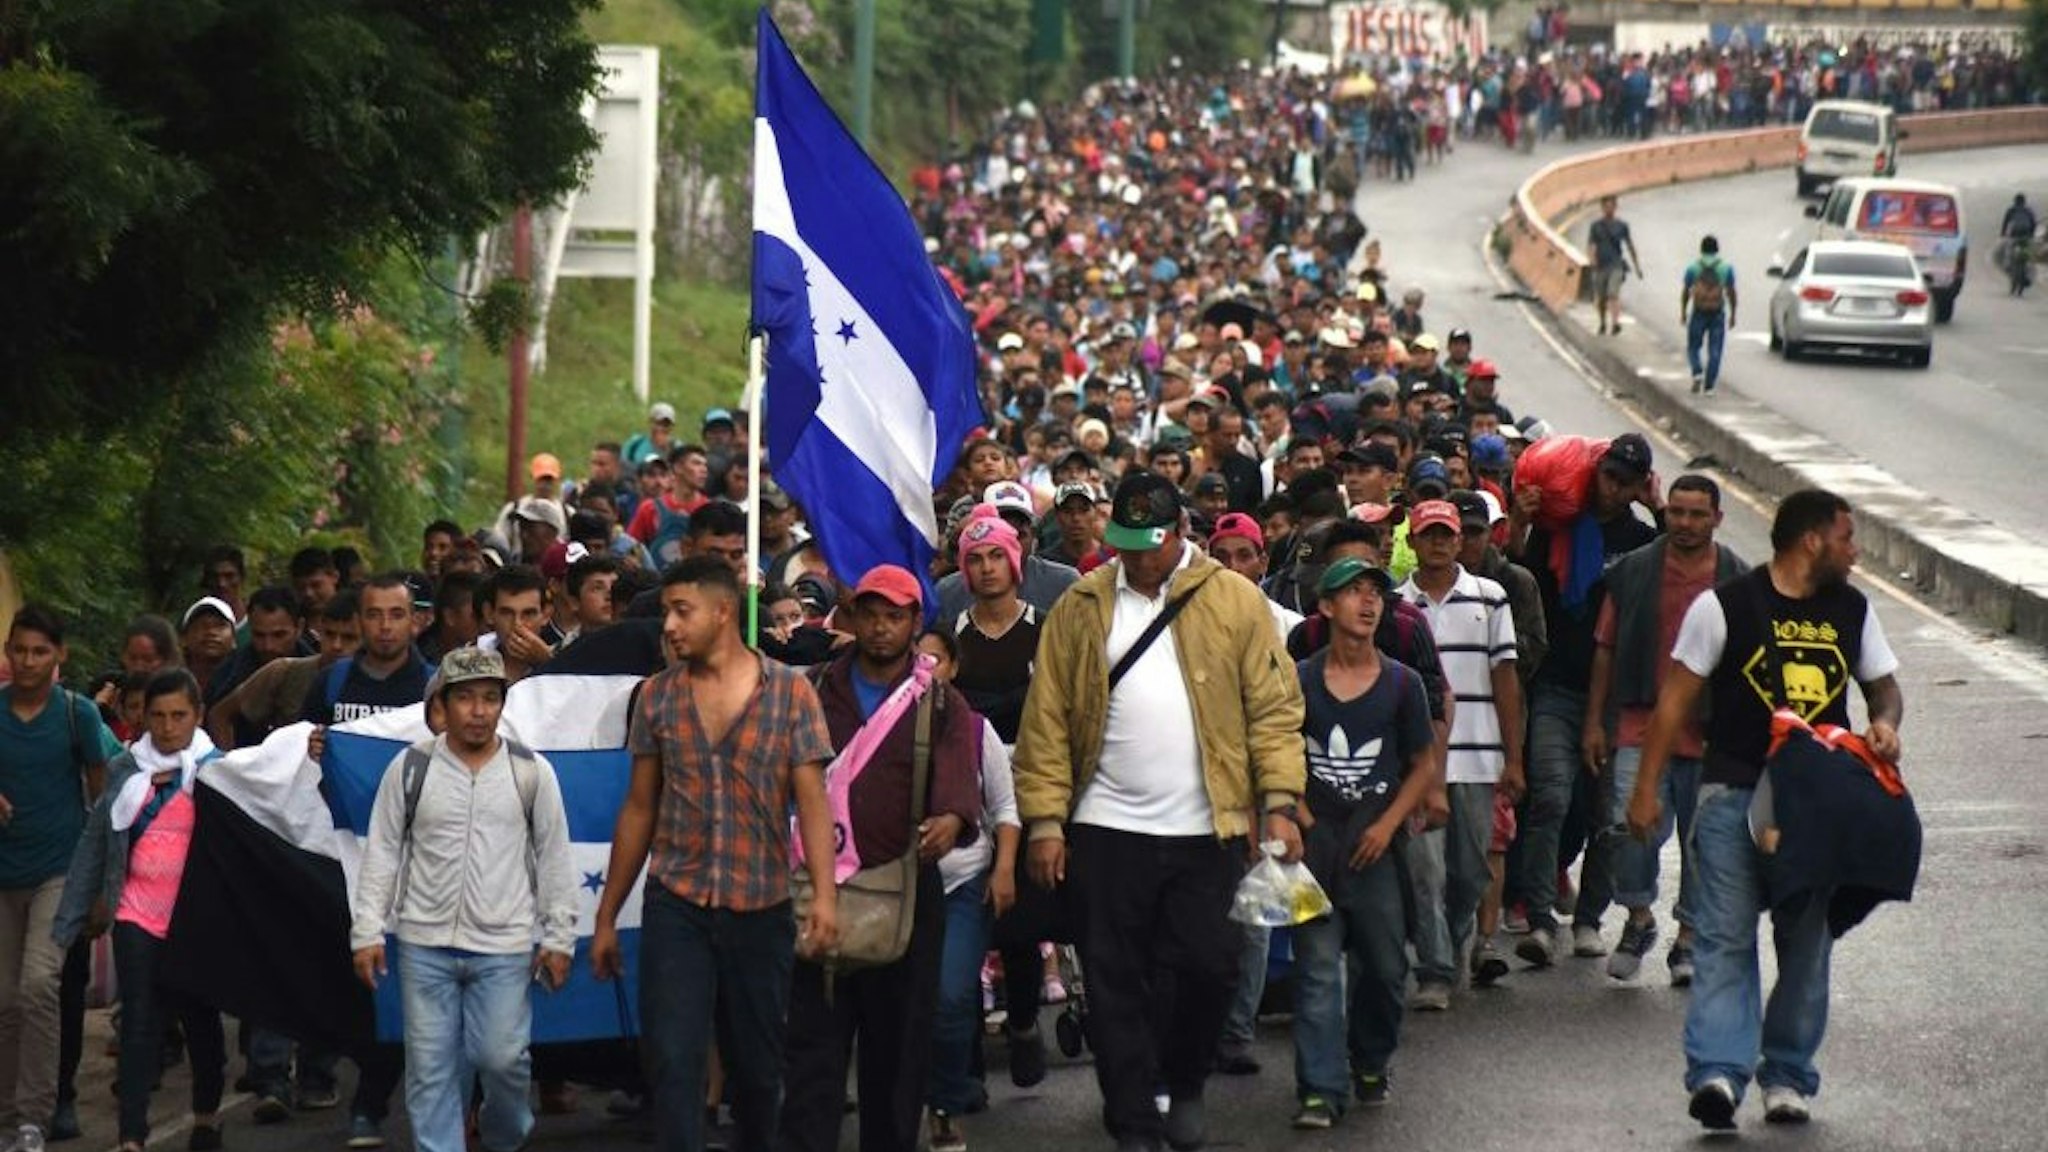 TOPSHOT - Honduran migrants take part in a caravan towards the United States in Chiquimula, Guatemala on October 17, 2018. - A migrant caravan set out on October 13 from the impoverished, violence-plagued country and was headed north on the long journey through Guatemala and Mexico to the US border. President Donald Trump warned Honduras he will cut millions of dollars in aid if the group of about 2,000 migrants is allowed to reach the United States. (Photo by ORLANDO ESTRADA / AFP) (Photo credit should read